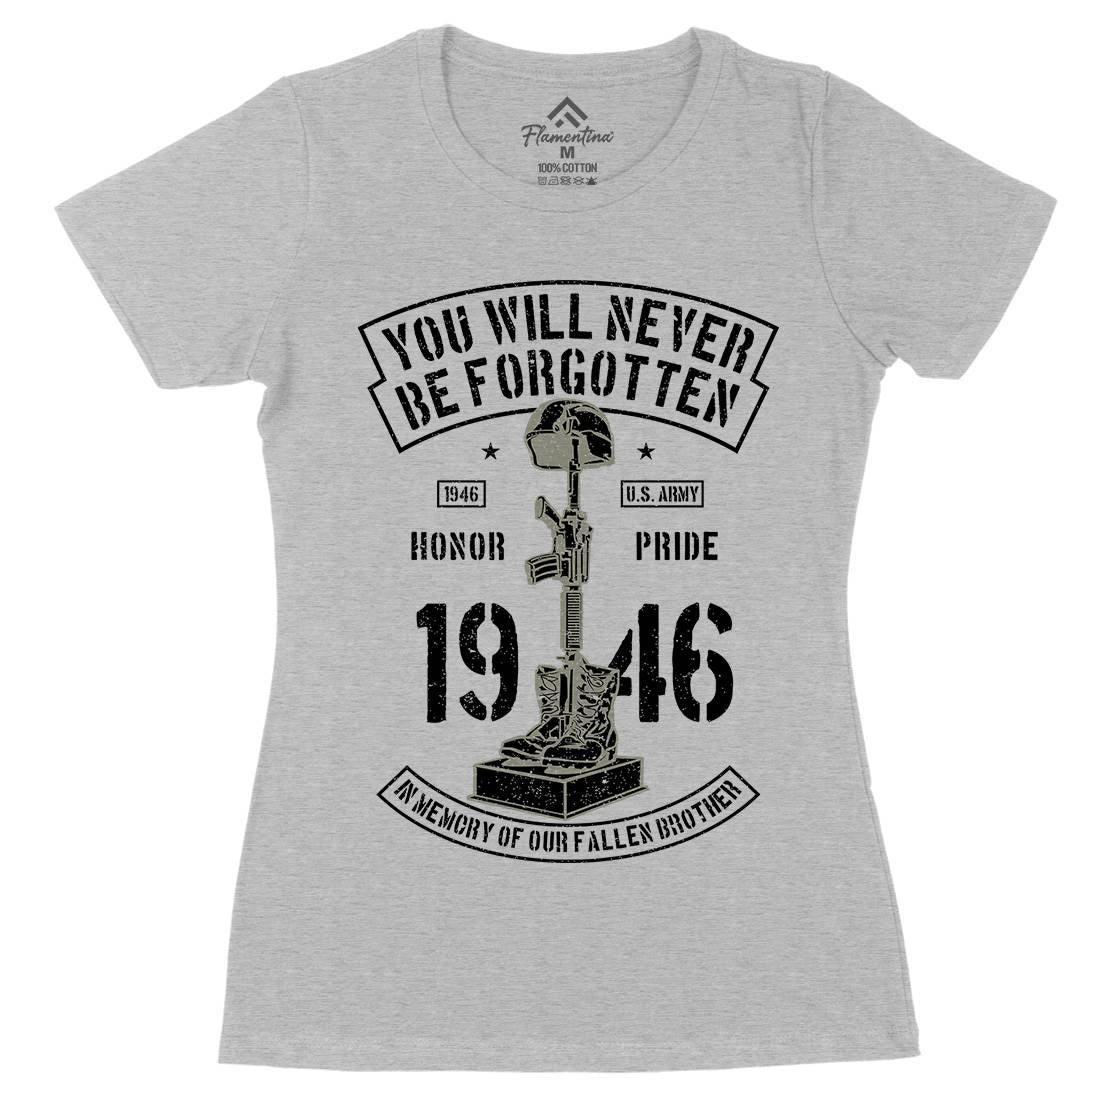 You Will Never Be Forgotten Womens Organic Crew Neck T-Shirt Army A800